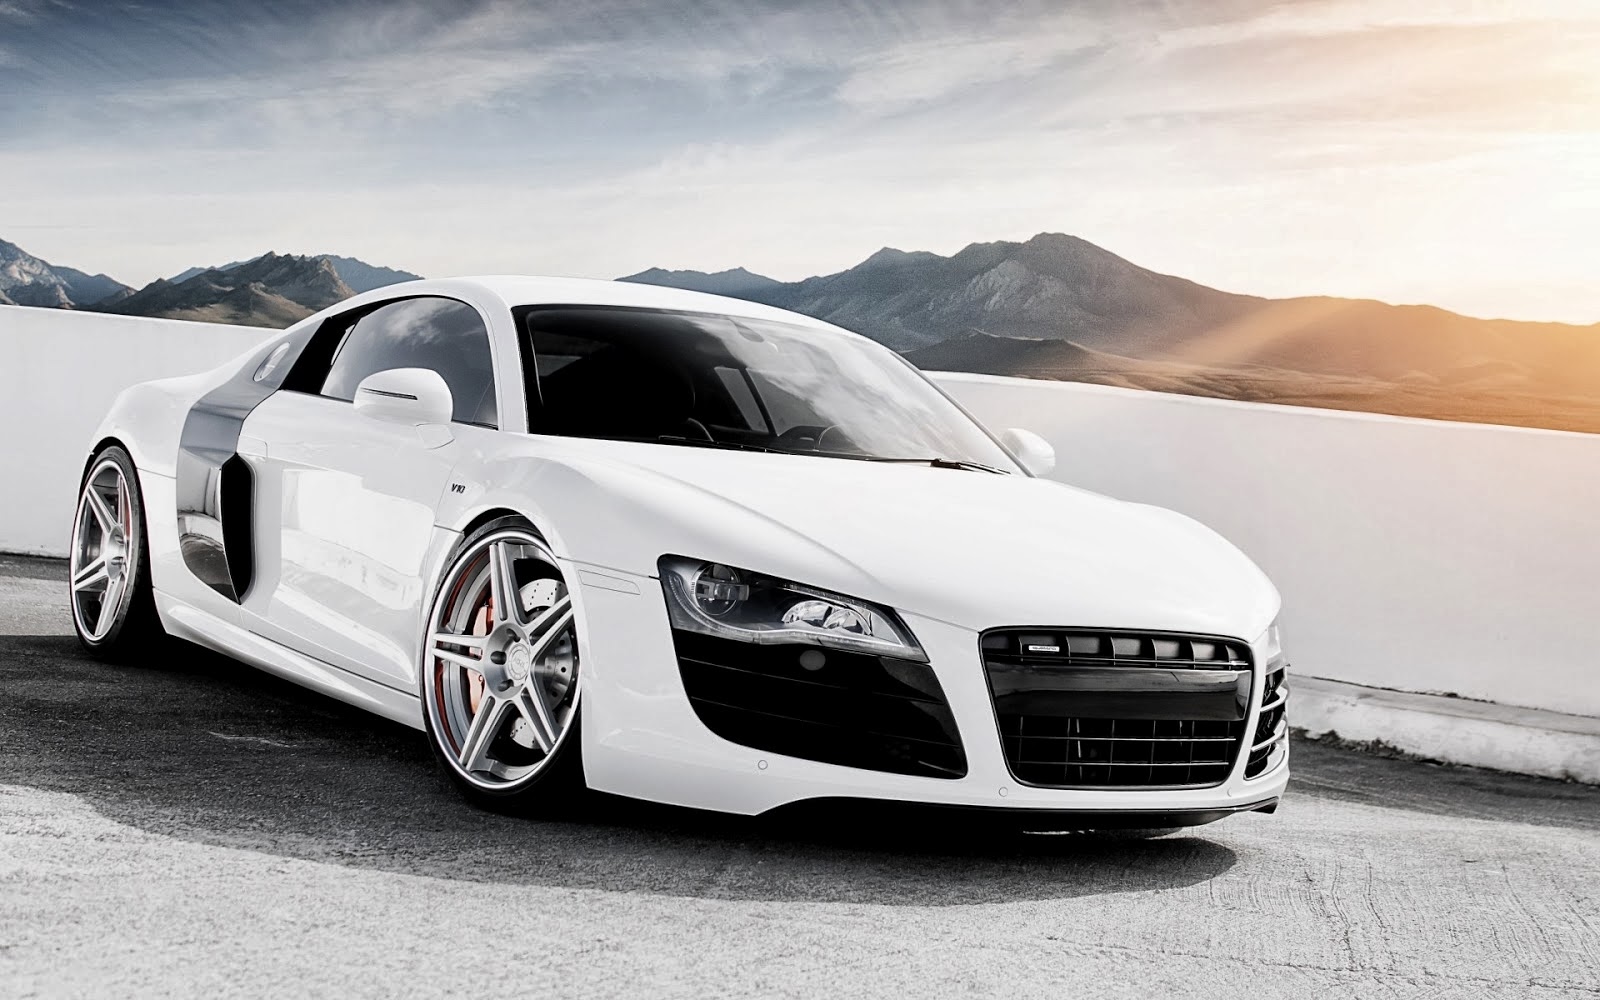 AUDI R8 HD WALLPAPERS FREE HD WALLPAPERS